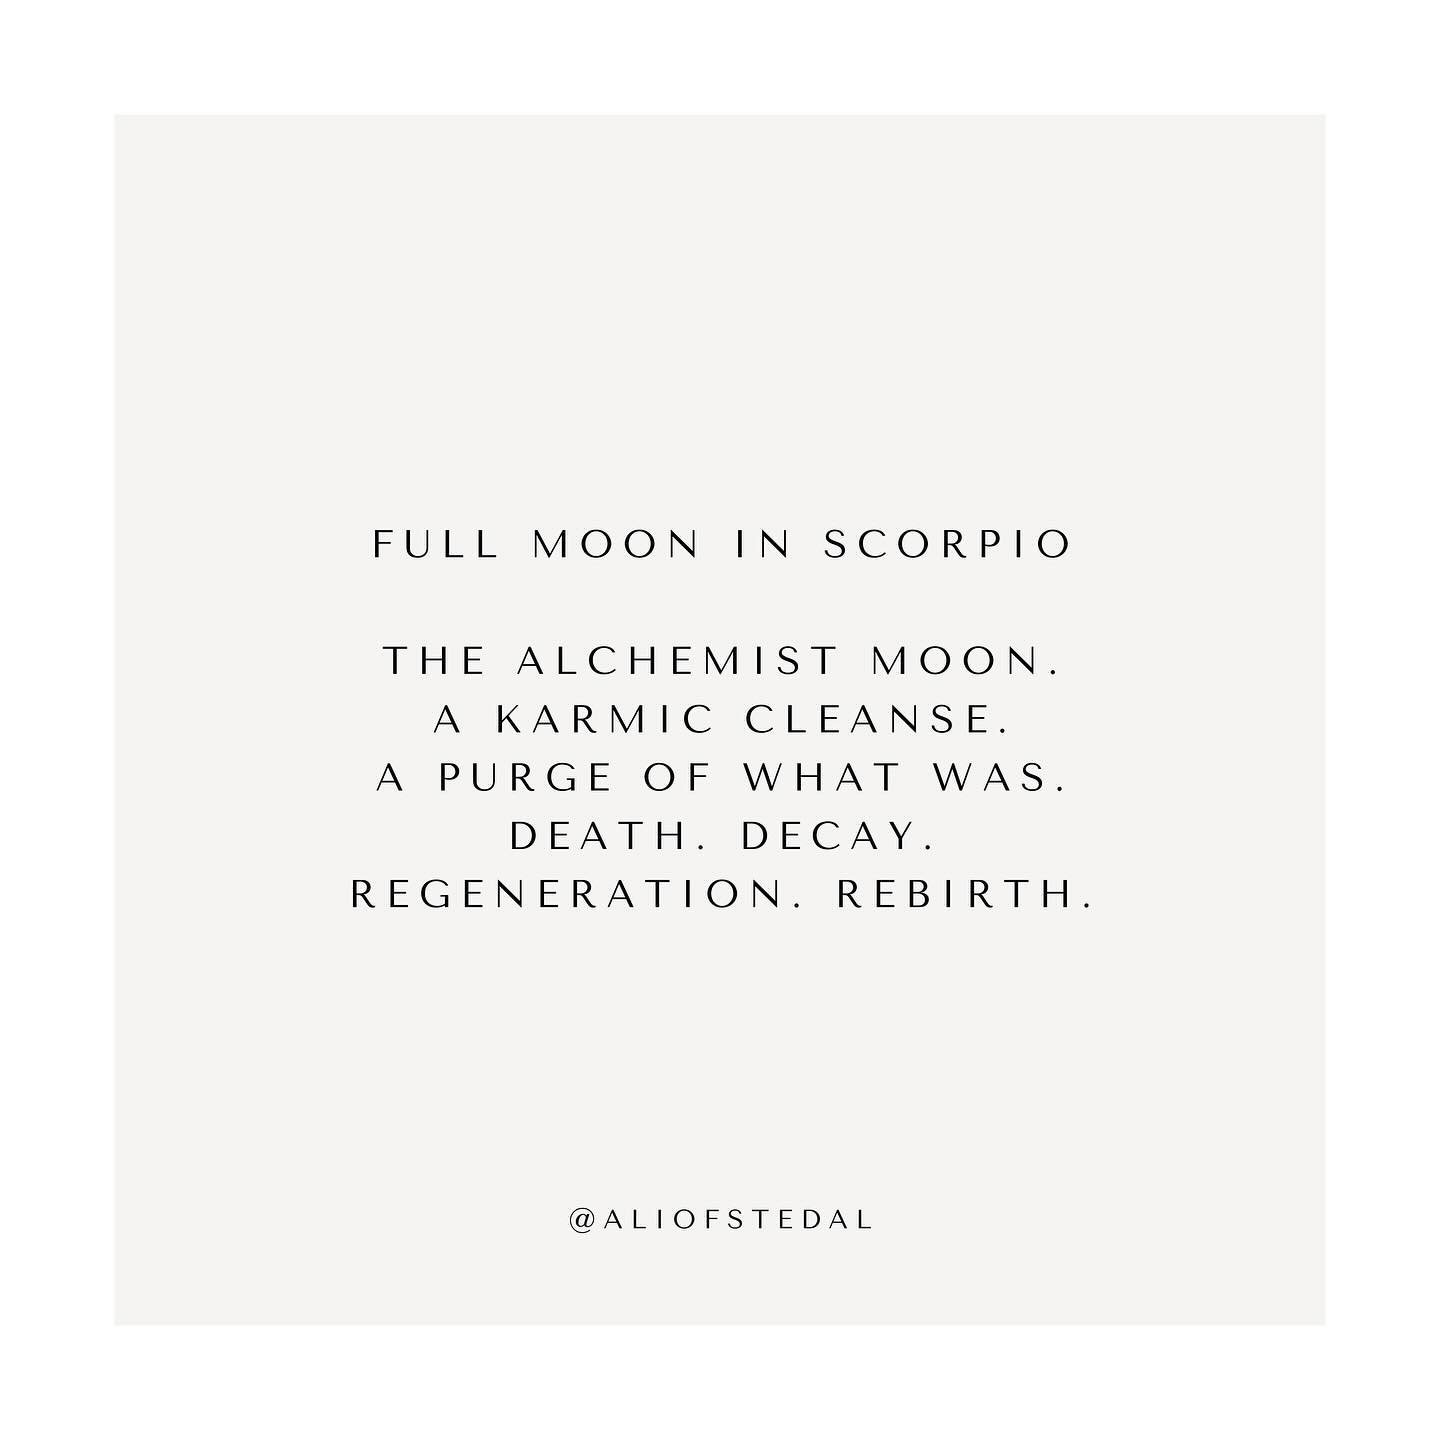 Full Moon in Scorpio 

A karmic cleanse.

A purge of what was.

Death. Decay. 
Regeneration. Rebirth. 

Both the Sun and the Moon 
square Pluto today, 
forming a pressurized t square.

Cracking open and shining a light 
on the karmic spaces within us